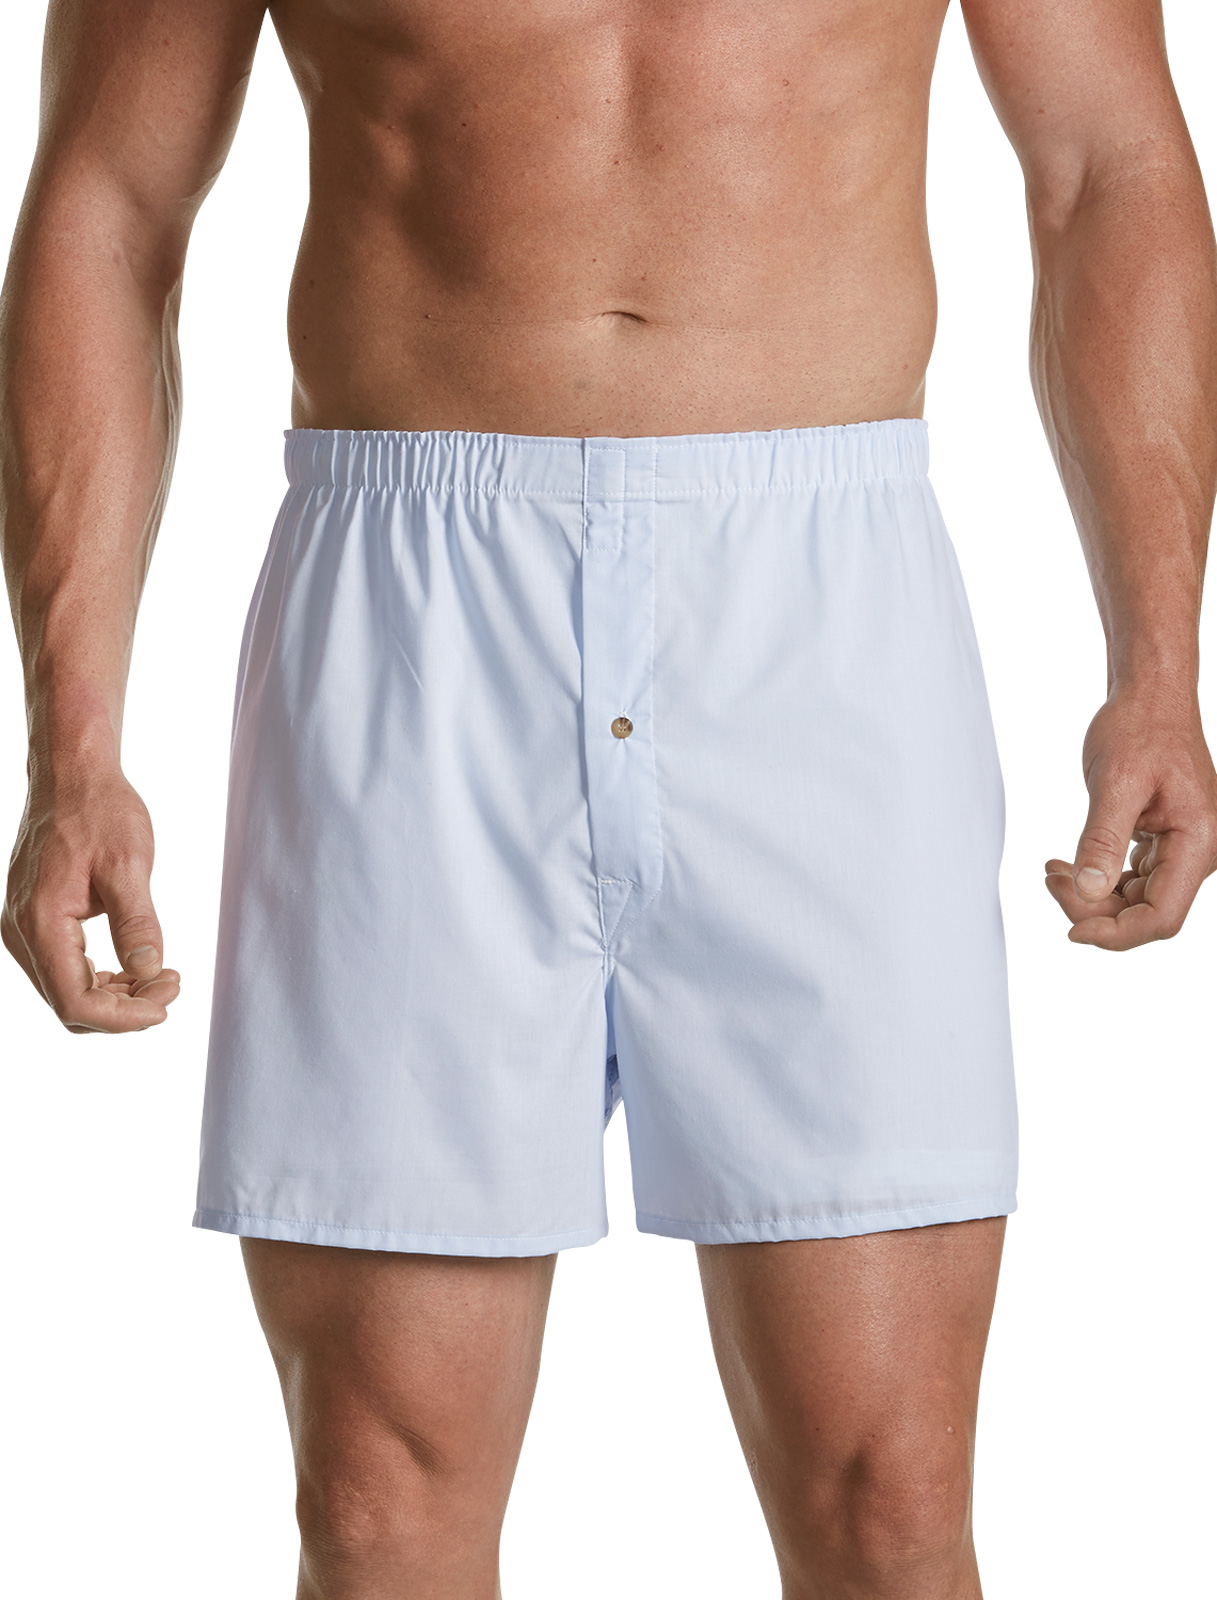 Harbor Bay Men's Big and Tall  3-pk Solid Woven Boxers